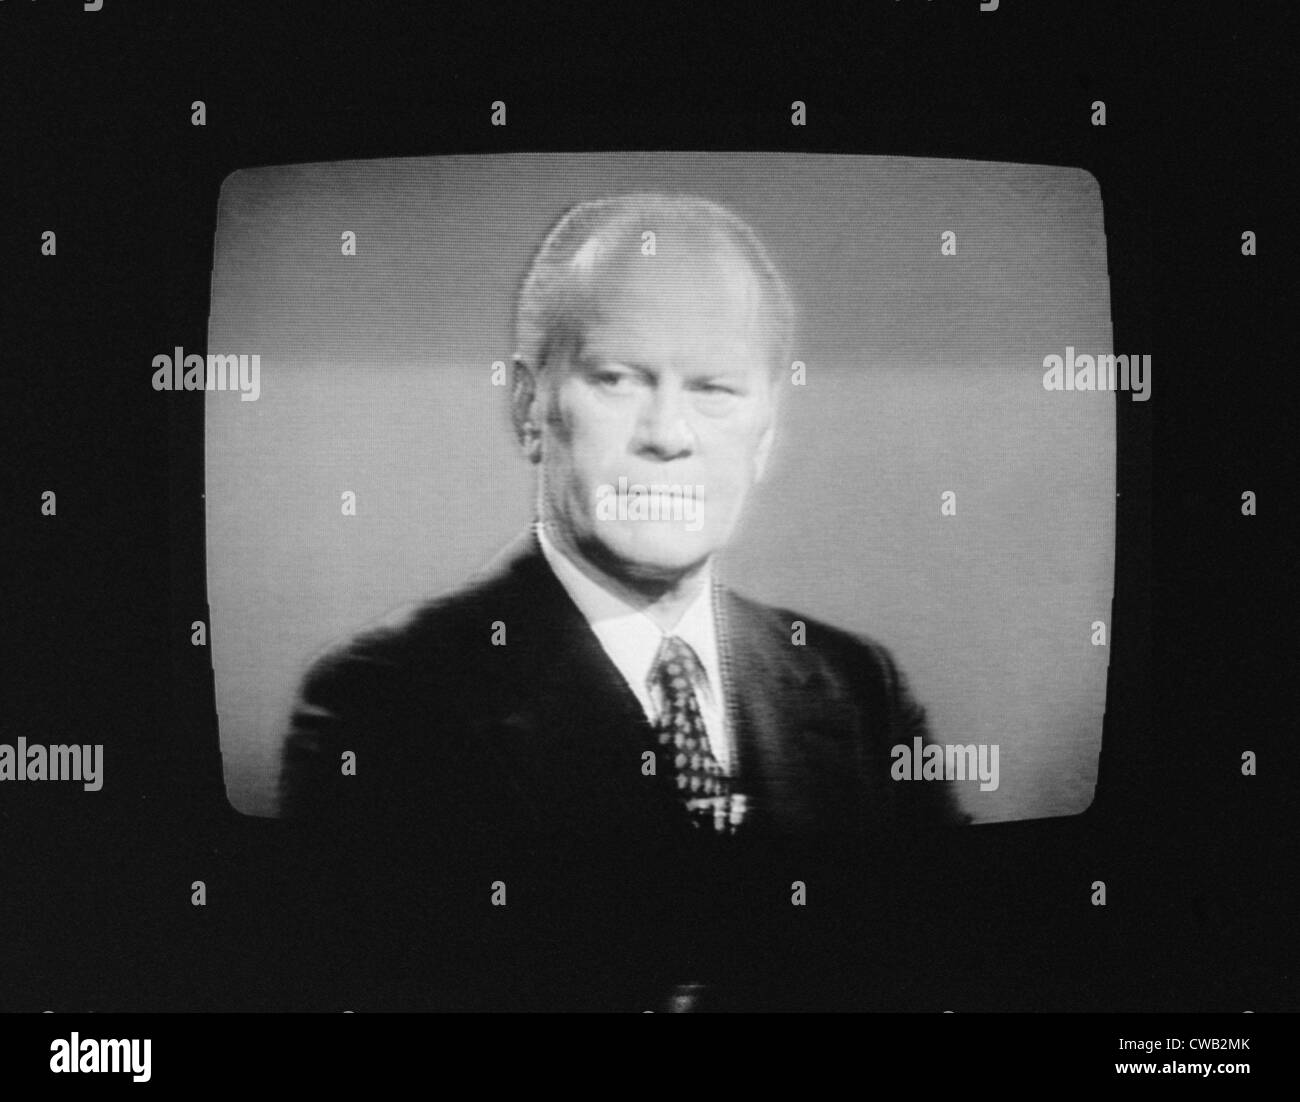 President Gerald Ford (1913-2006), U.S. President 1974-1977, on television during his first presidential debate in Stock Photo